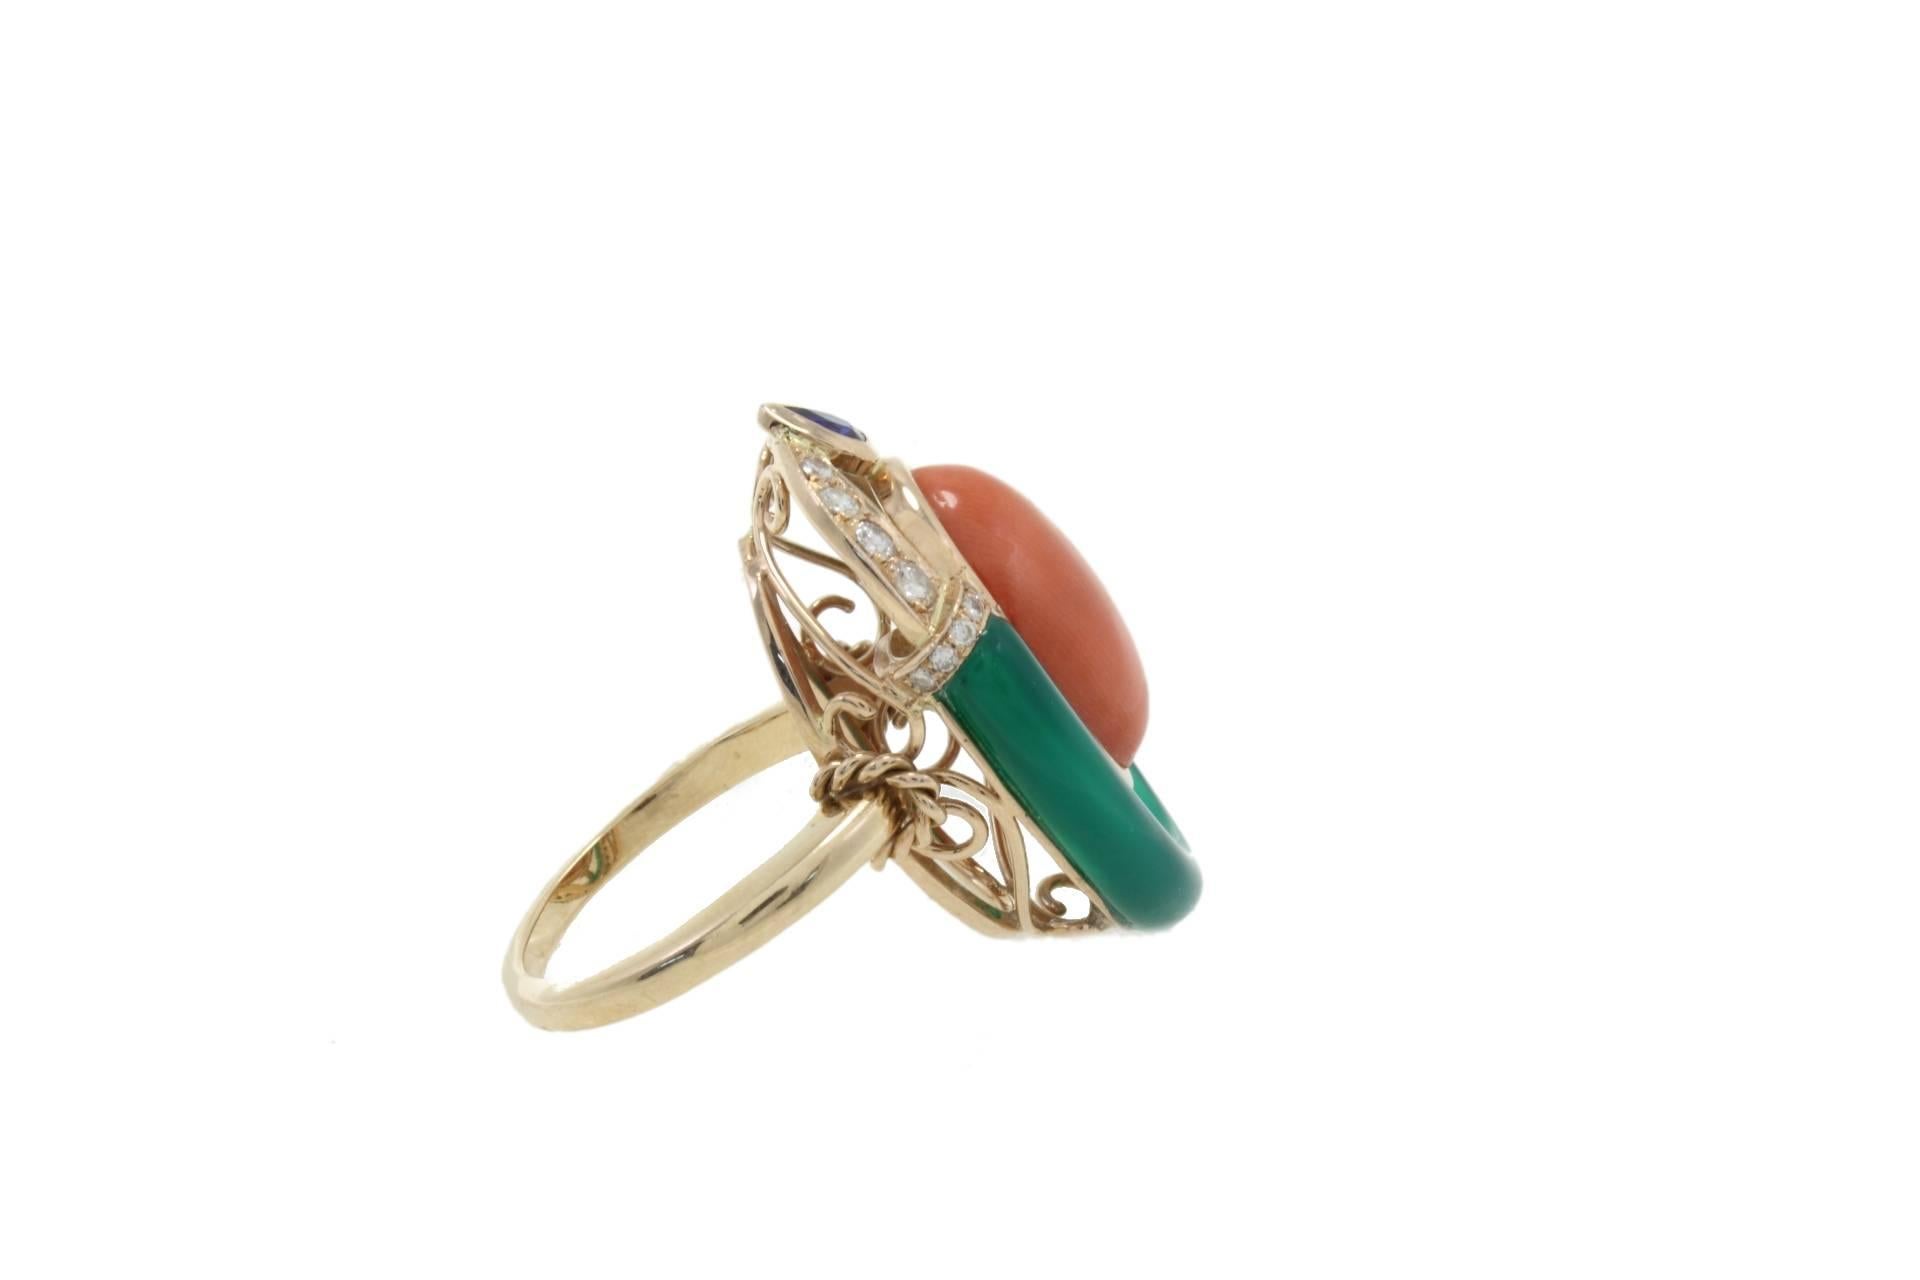 Cocktail ring in 14k rose gold mounted with diamonds, blue sapphire, green agate and coral.
Diamonds 0.40 kt
Blue Sapphire 0.27 kt
Green Agate 0.70 gr
Coral 1.80 gr
Tot.Weight 11.30 gr
R.F faao